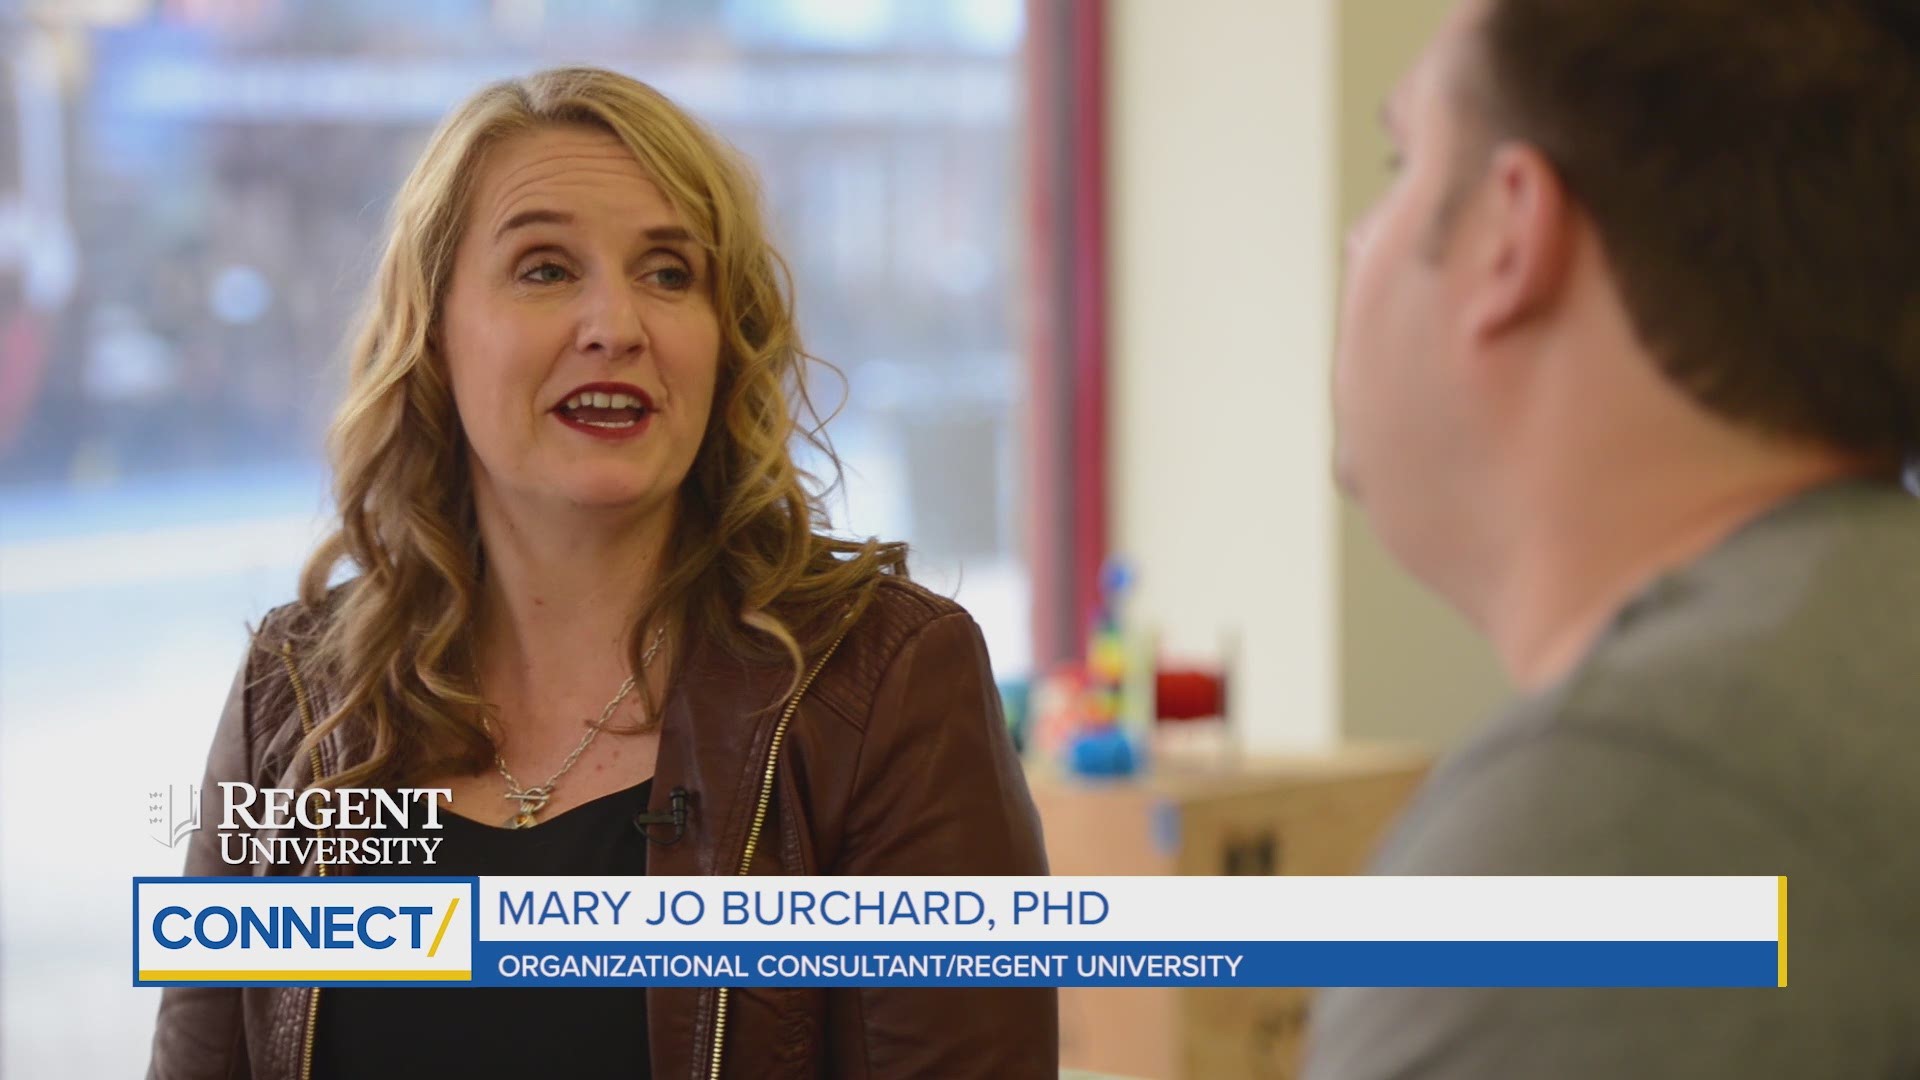 Are you putting goals aside because you're worried they won't work out the way you want? We spoke with Organizational Consultant, Mary Jo Buchard, PHD, about embracing failure and overcoming fears.